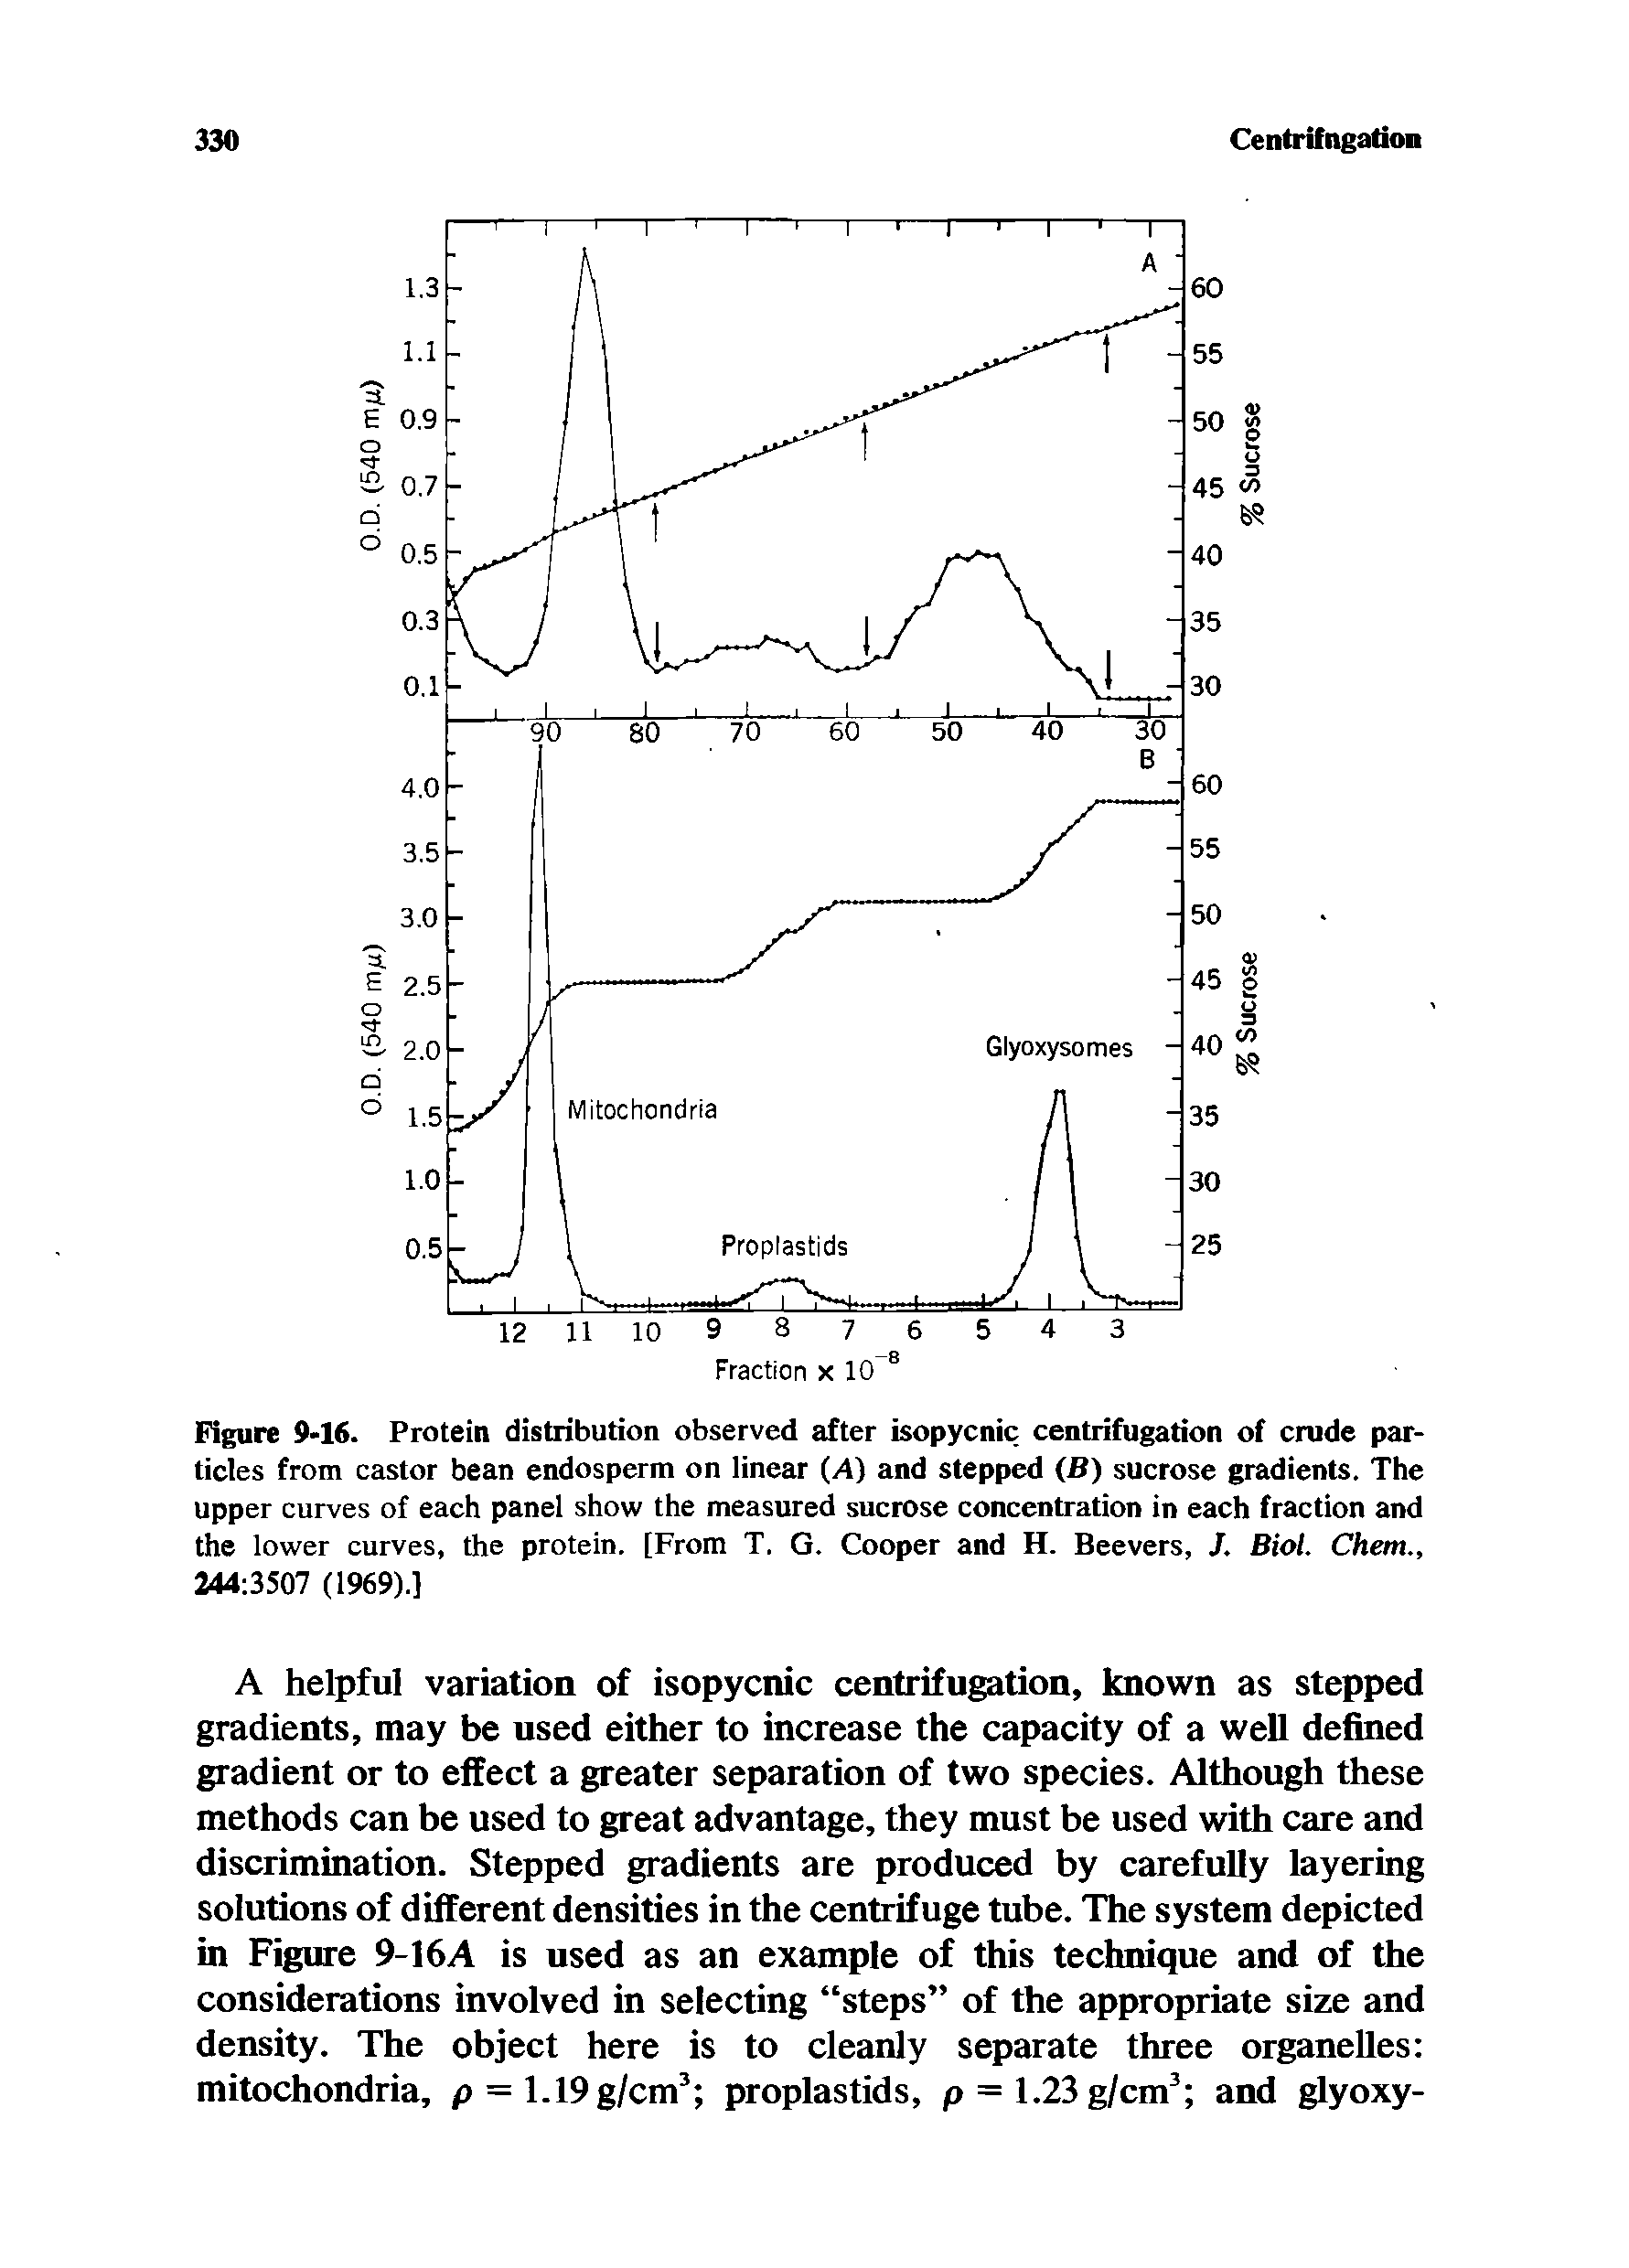 Figure 9-16. Protein distribution observed after isopycnic centrifugation of crude particles from castor bean endosperm on linear A) and stepped (B) sucrose gradients. The upper curves of each panel show the measured sucrose concentration in each fraction and the lower curves, the protein. [From T. G. Cooper and H. Beevers, J. Biol. Chem., 244 3507 (1969).]...